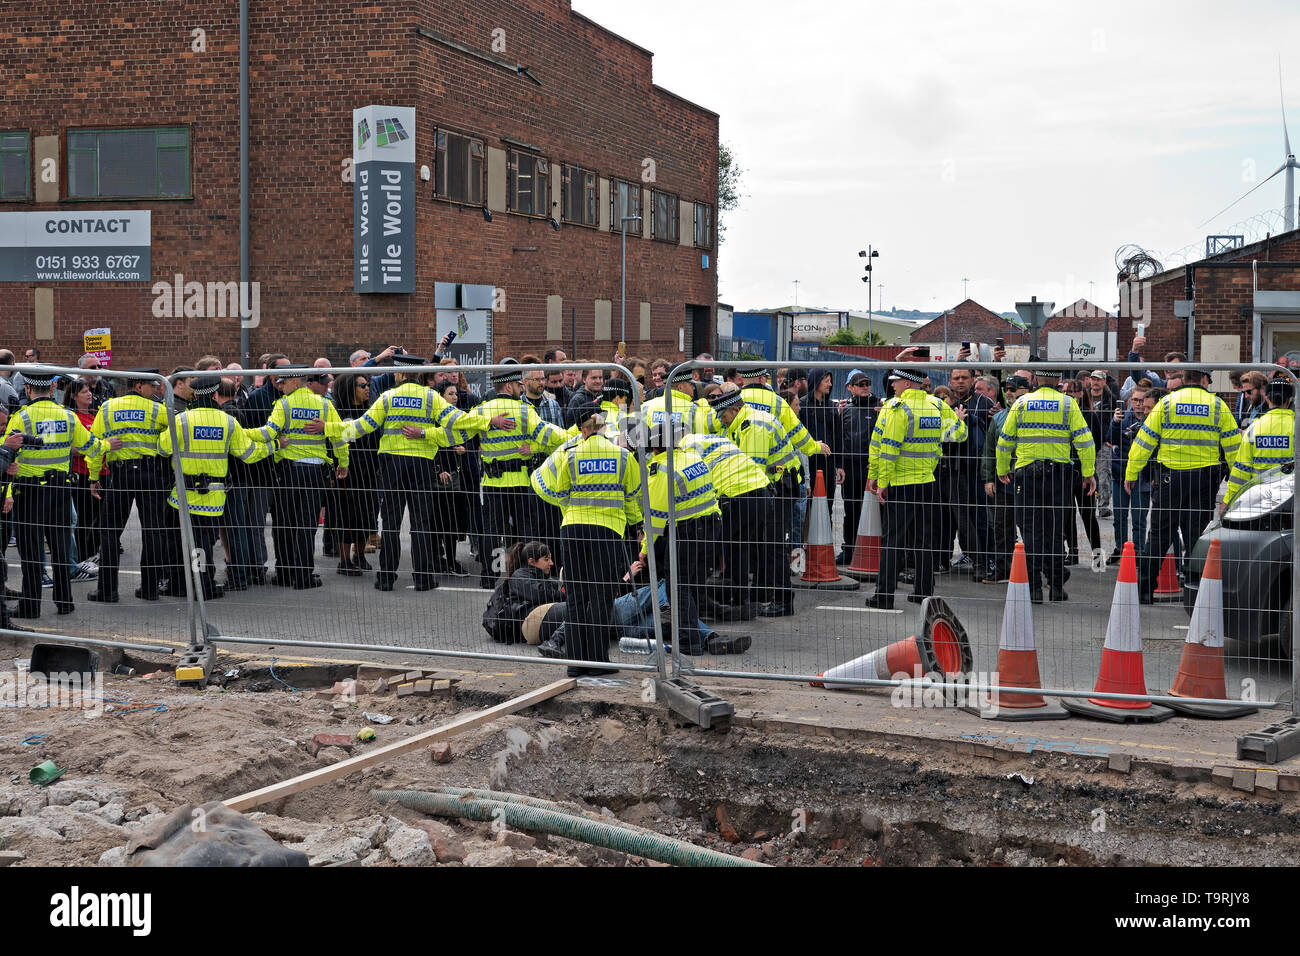 Police controlling a crowd of anti Tommy Robinson demonstrators as he campaigns in Bootle Liverpool UK for the Euro MEP elections. Stock Photo